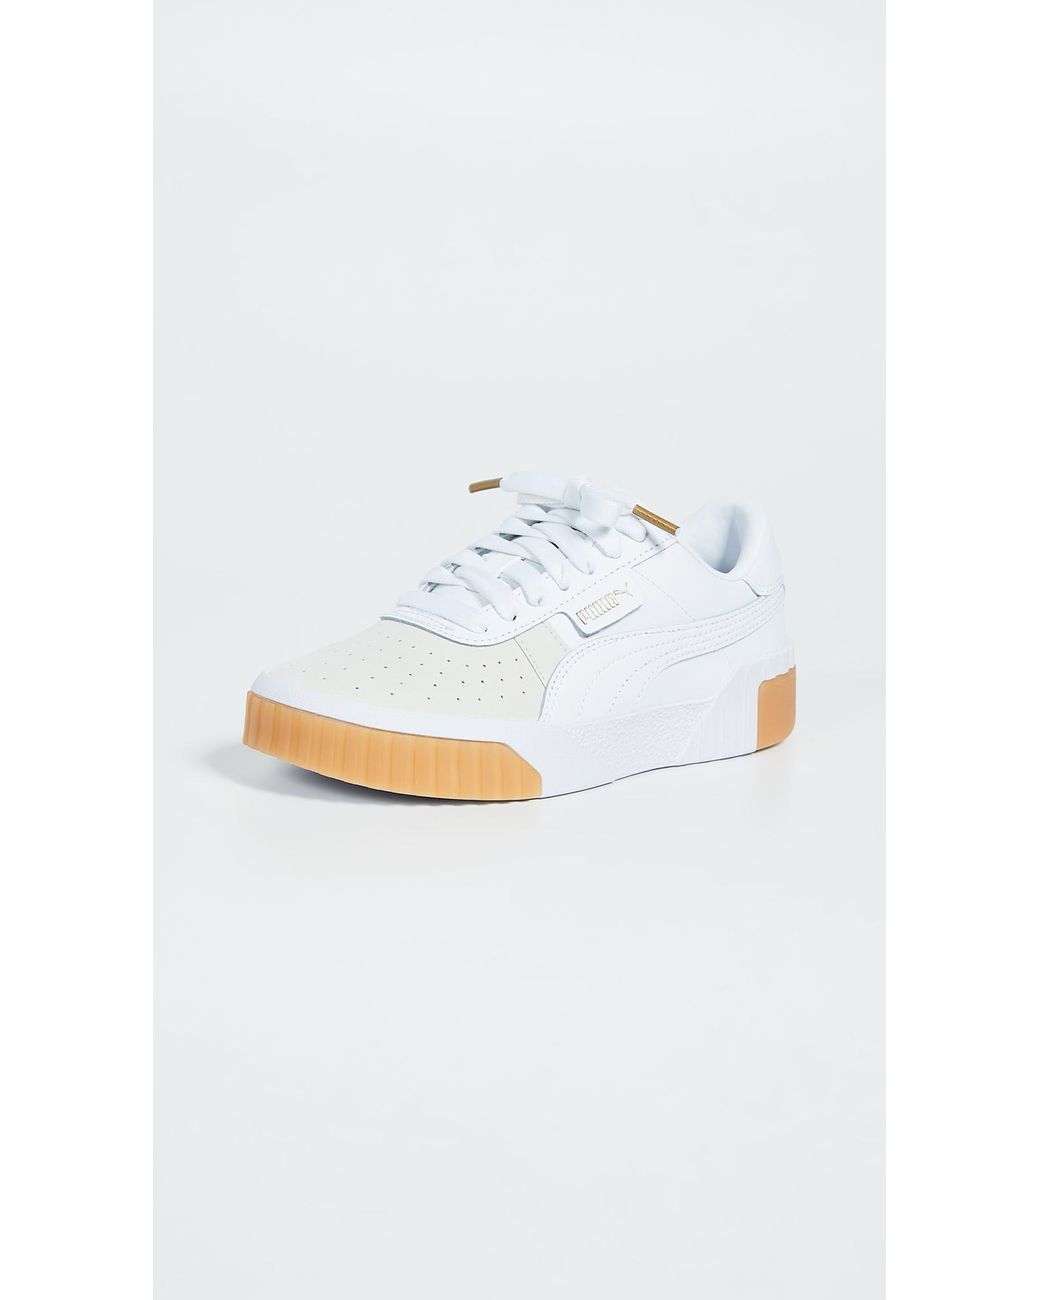 PUMA Exotic Sneakers in White Lyst